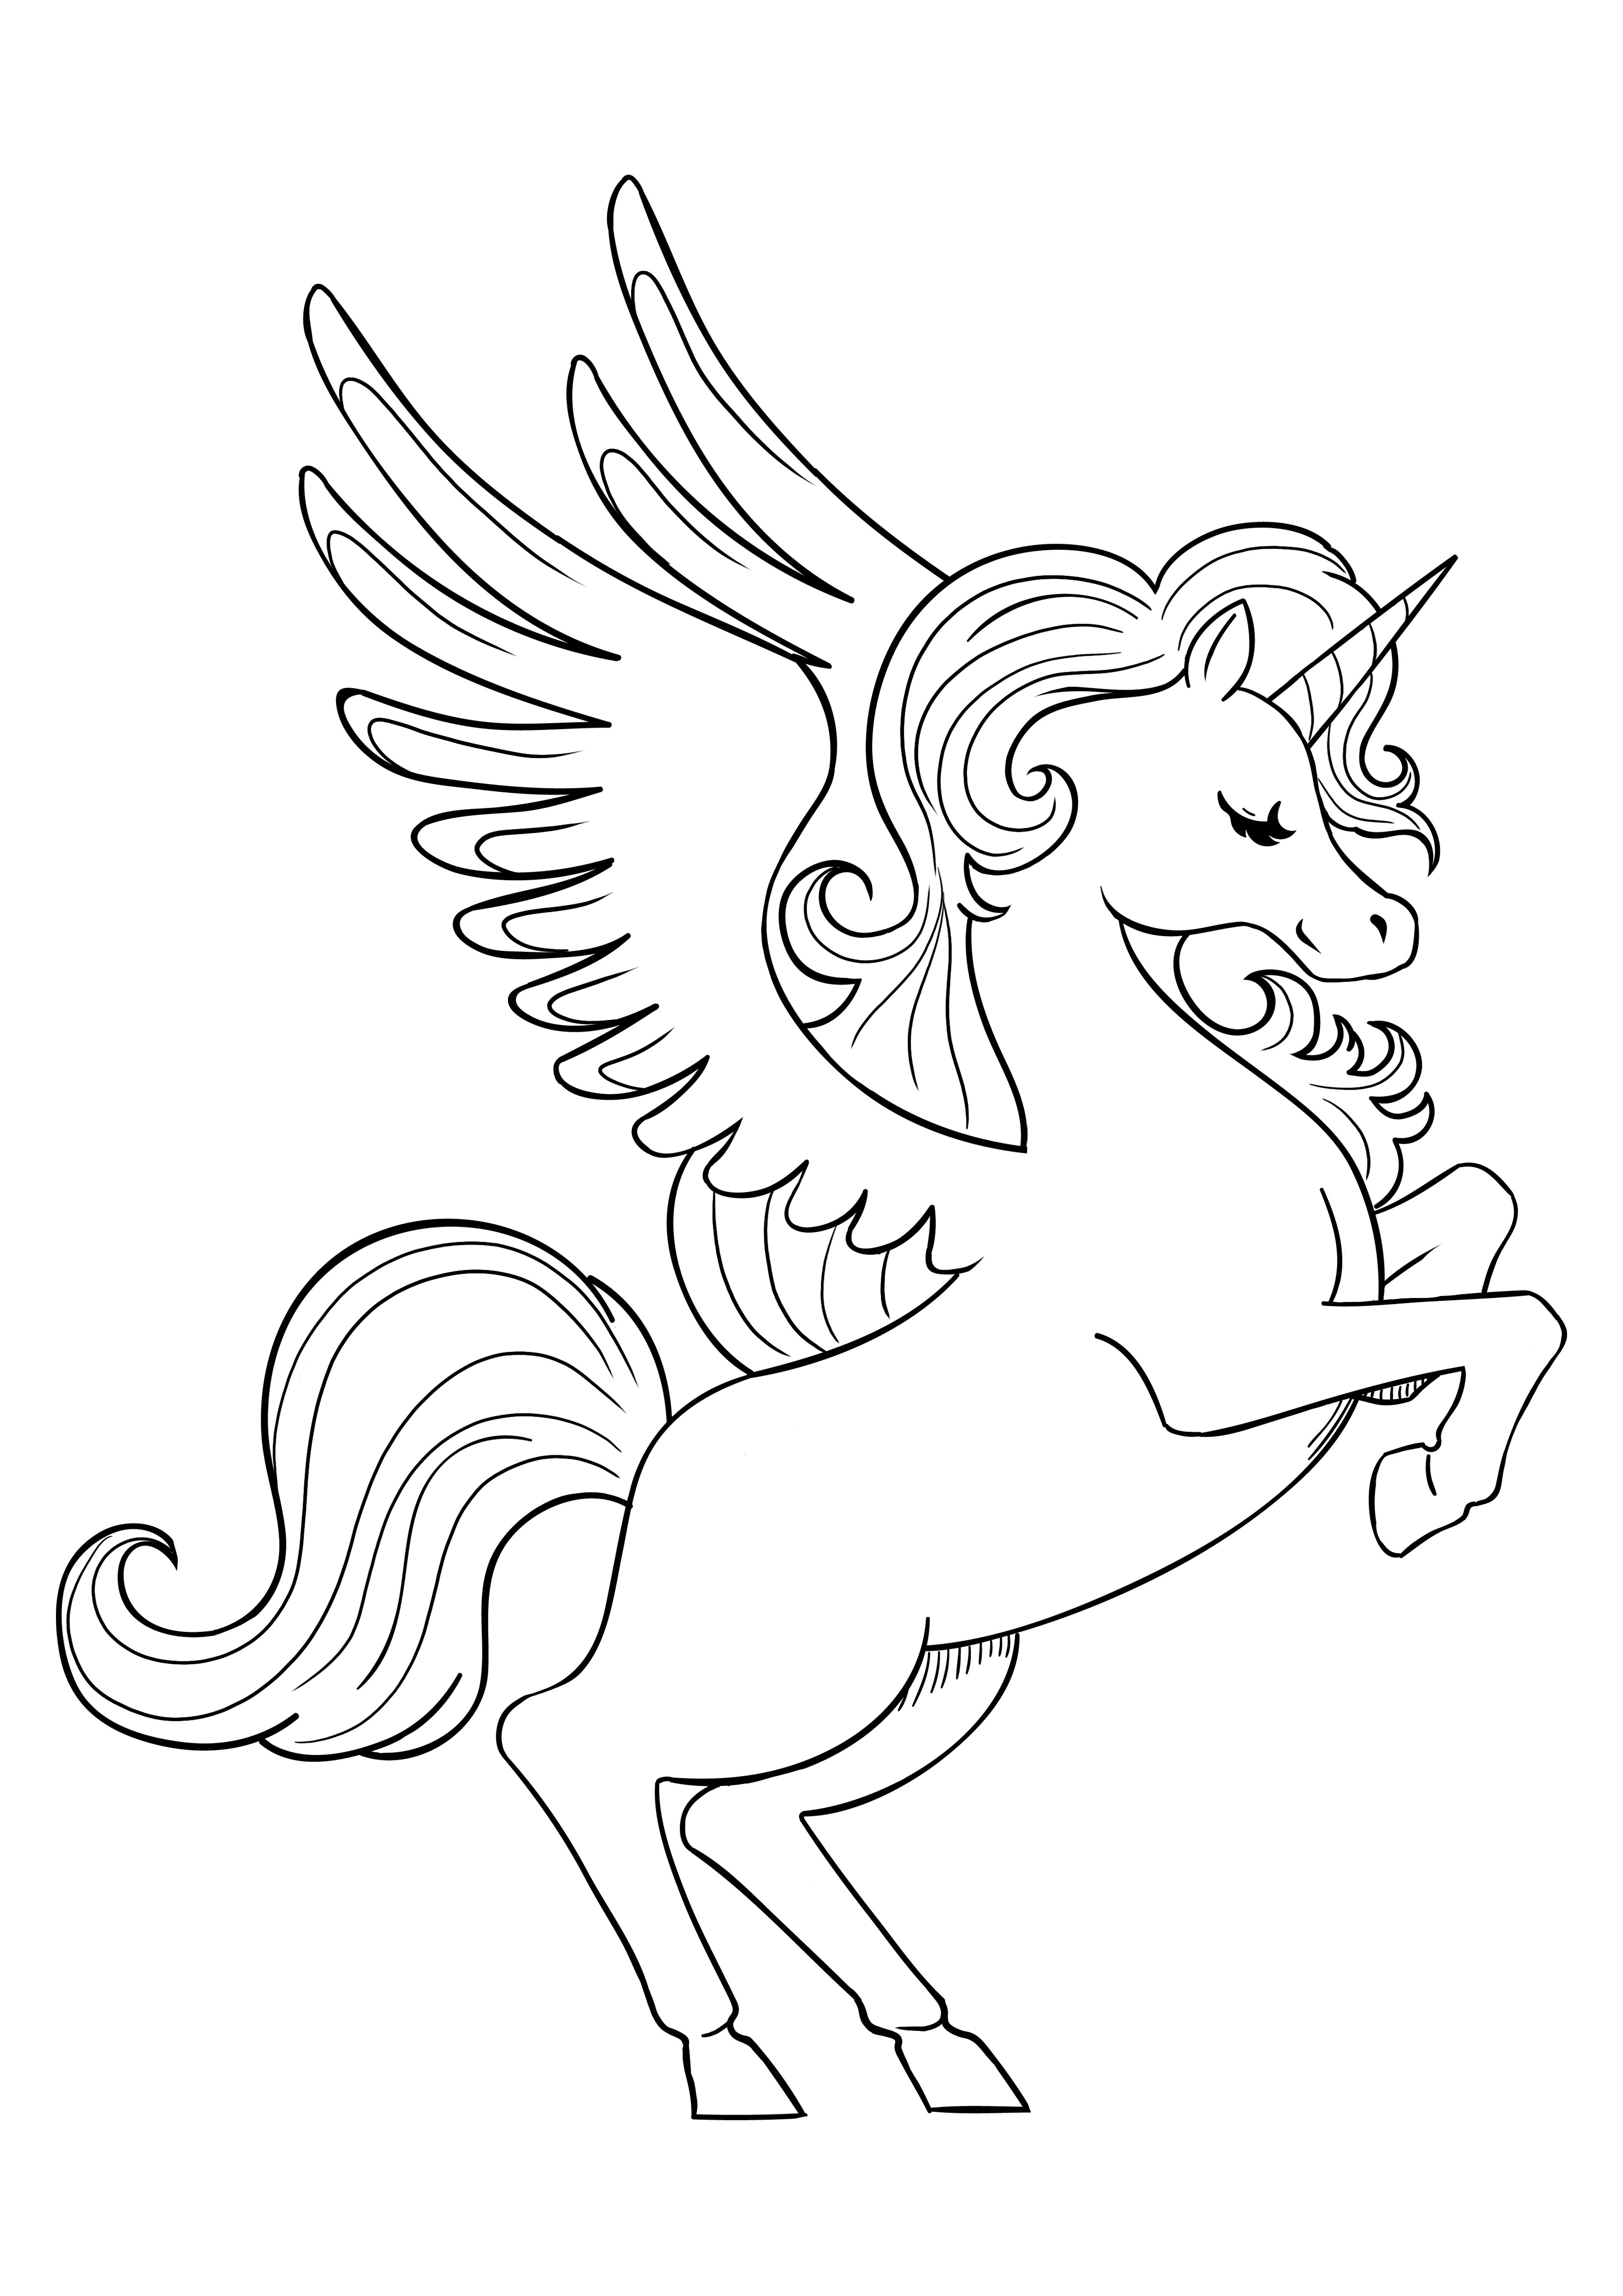 Unicorn neighing is free to color by kids and simple to print